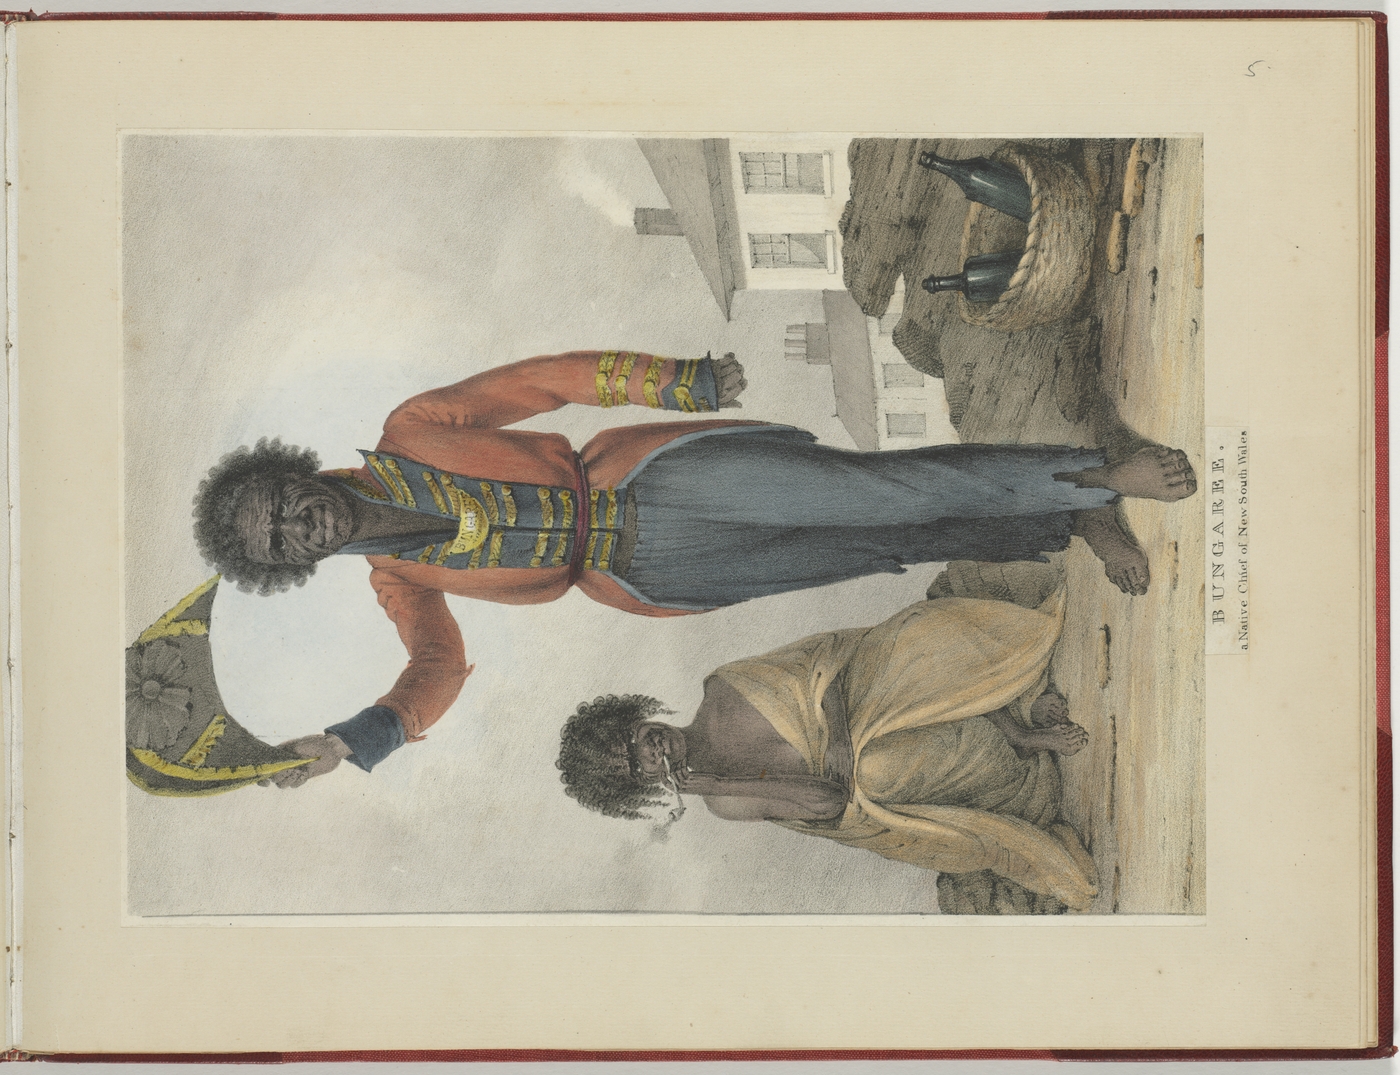 Bungaree. a Native Chief of New South Wales by Augustus Earle, hand-coloured lithograph, published in his Views in New South Wales and Van Diemens Land, 1830